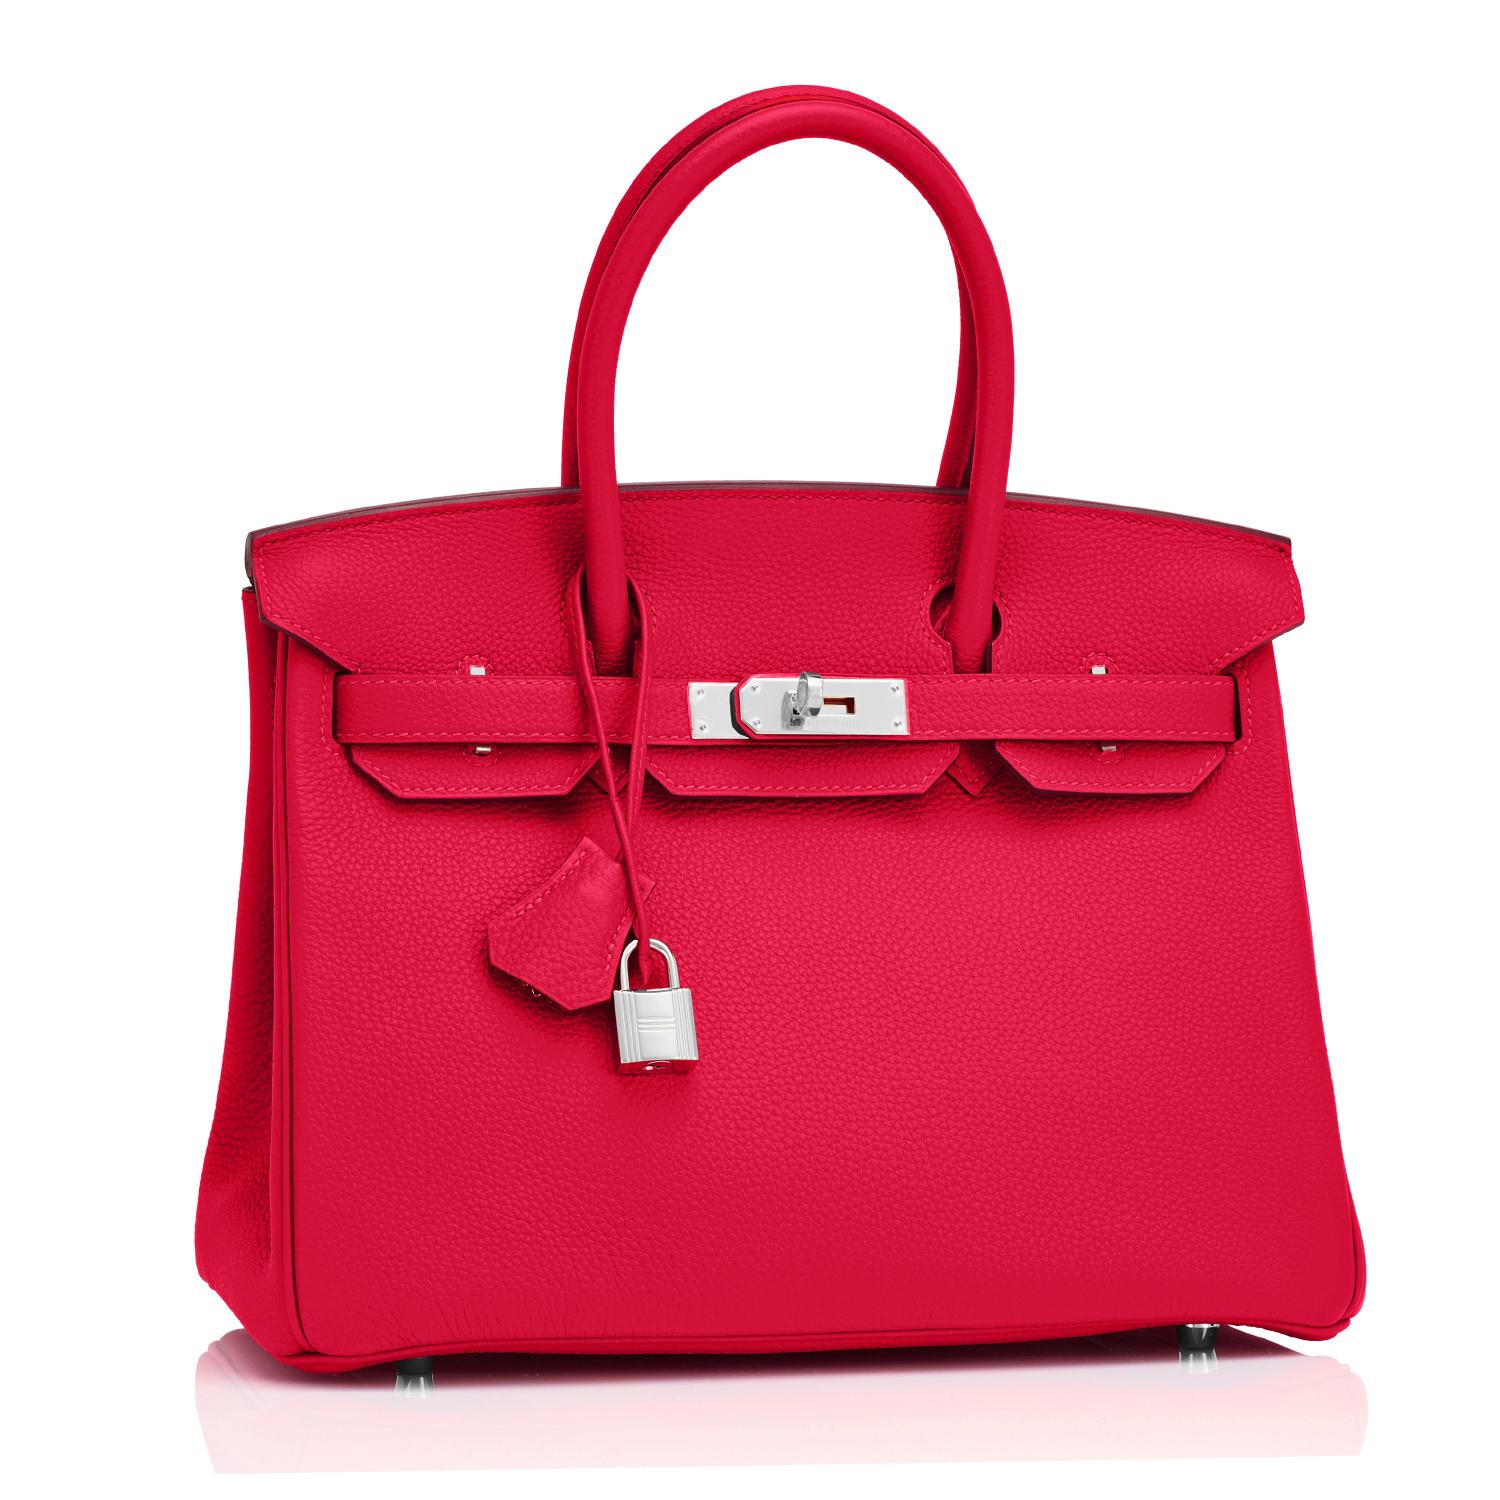 Women's Hermes Birkin 30 Rouge Casaque Verso Bag Red Y Stamp, 2020 RARE Limited Edition